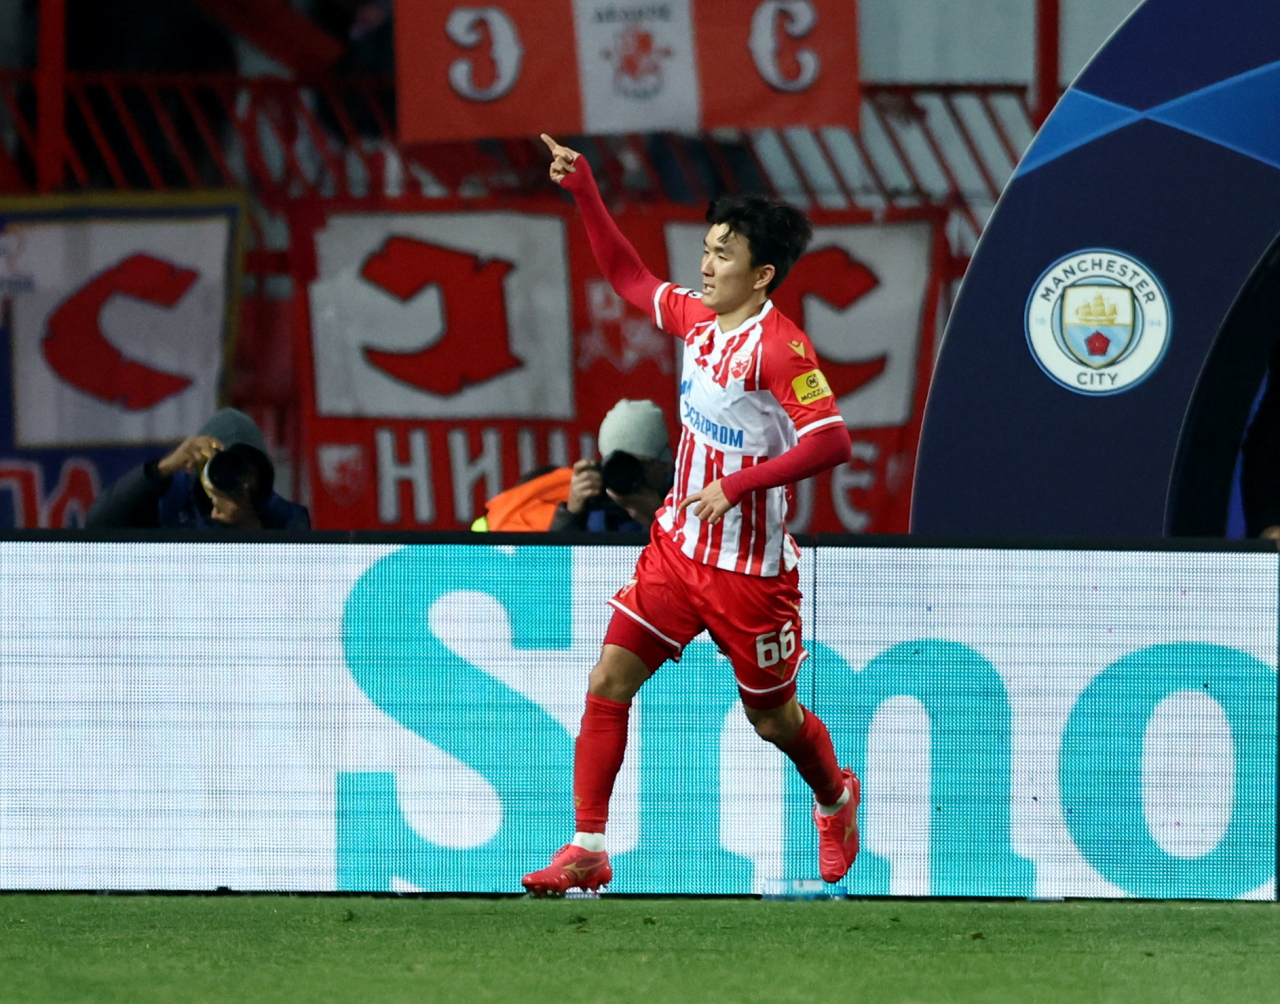 Hwang In-beom of Crvena zvezda celebrates after scoring against Manchester City during the clubs' Group G match at the UEFA Champions League at Stadion Rajko Mitic in Belgrade on Wednesday. (Yonhap)